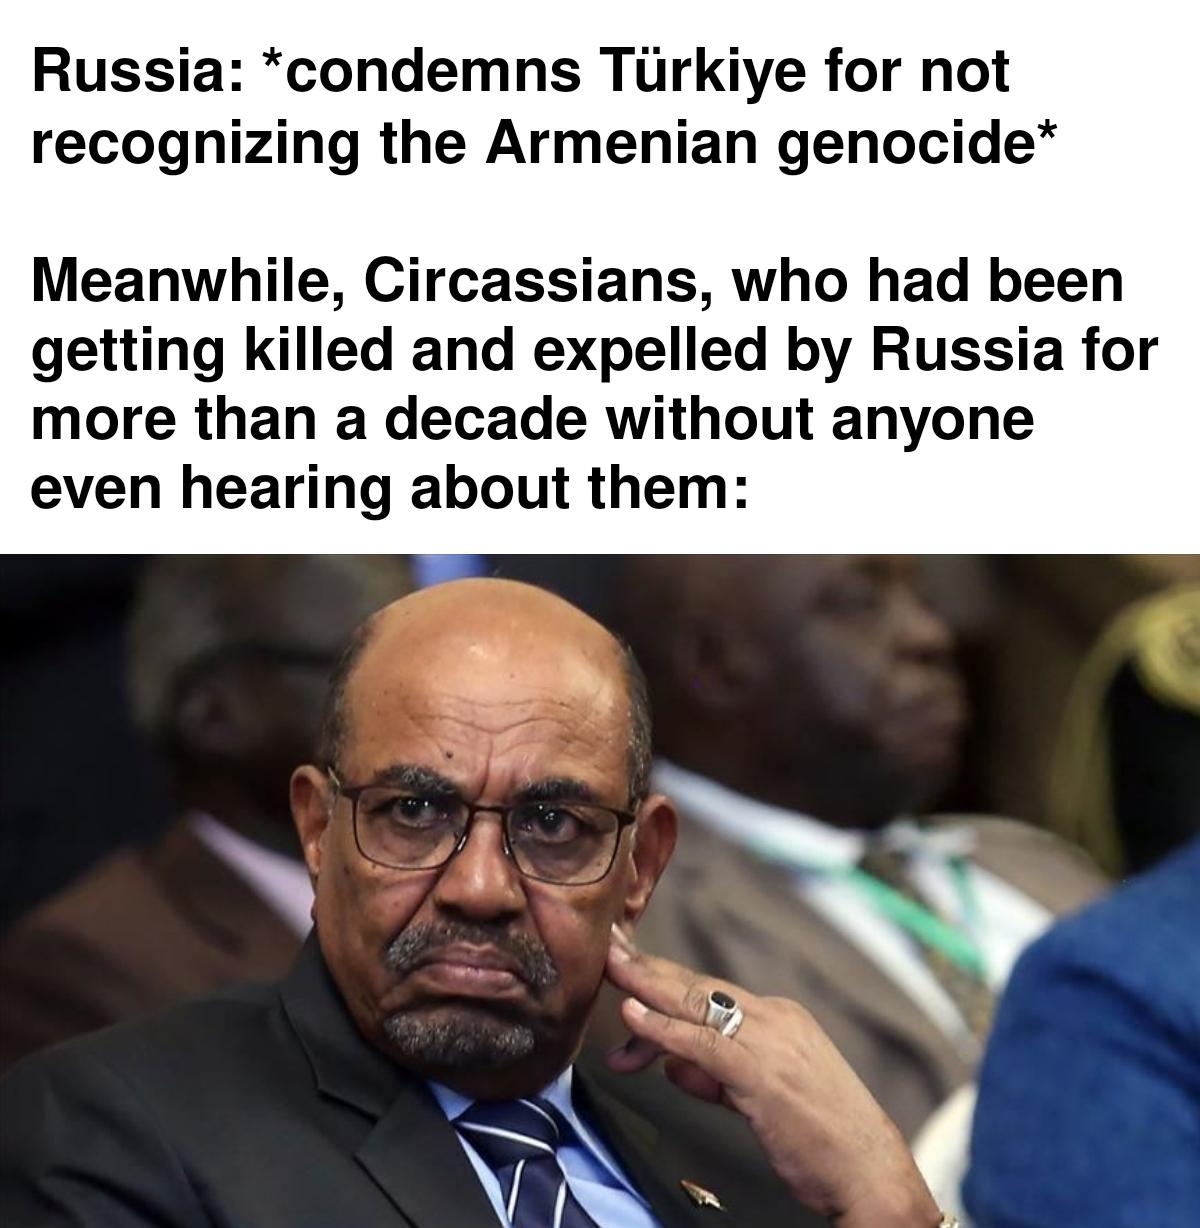 Russia: *condemns Türkiye for not recognizing the Armenian genocide* Meanwhile, Circassians, who had been getting killed and expelled by Russia for more than a decade without anyone even hearing about them: